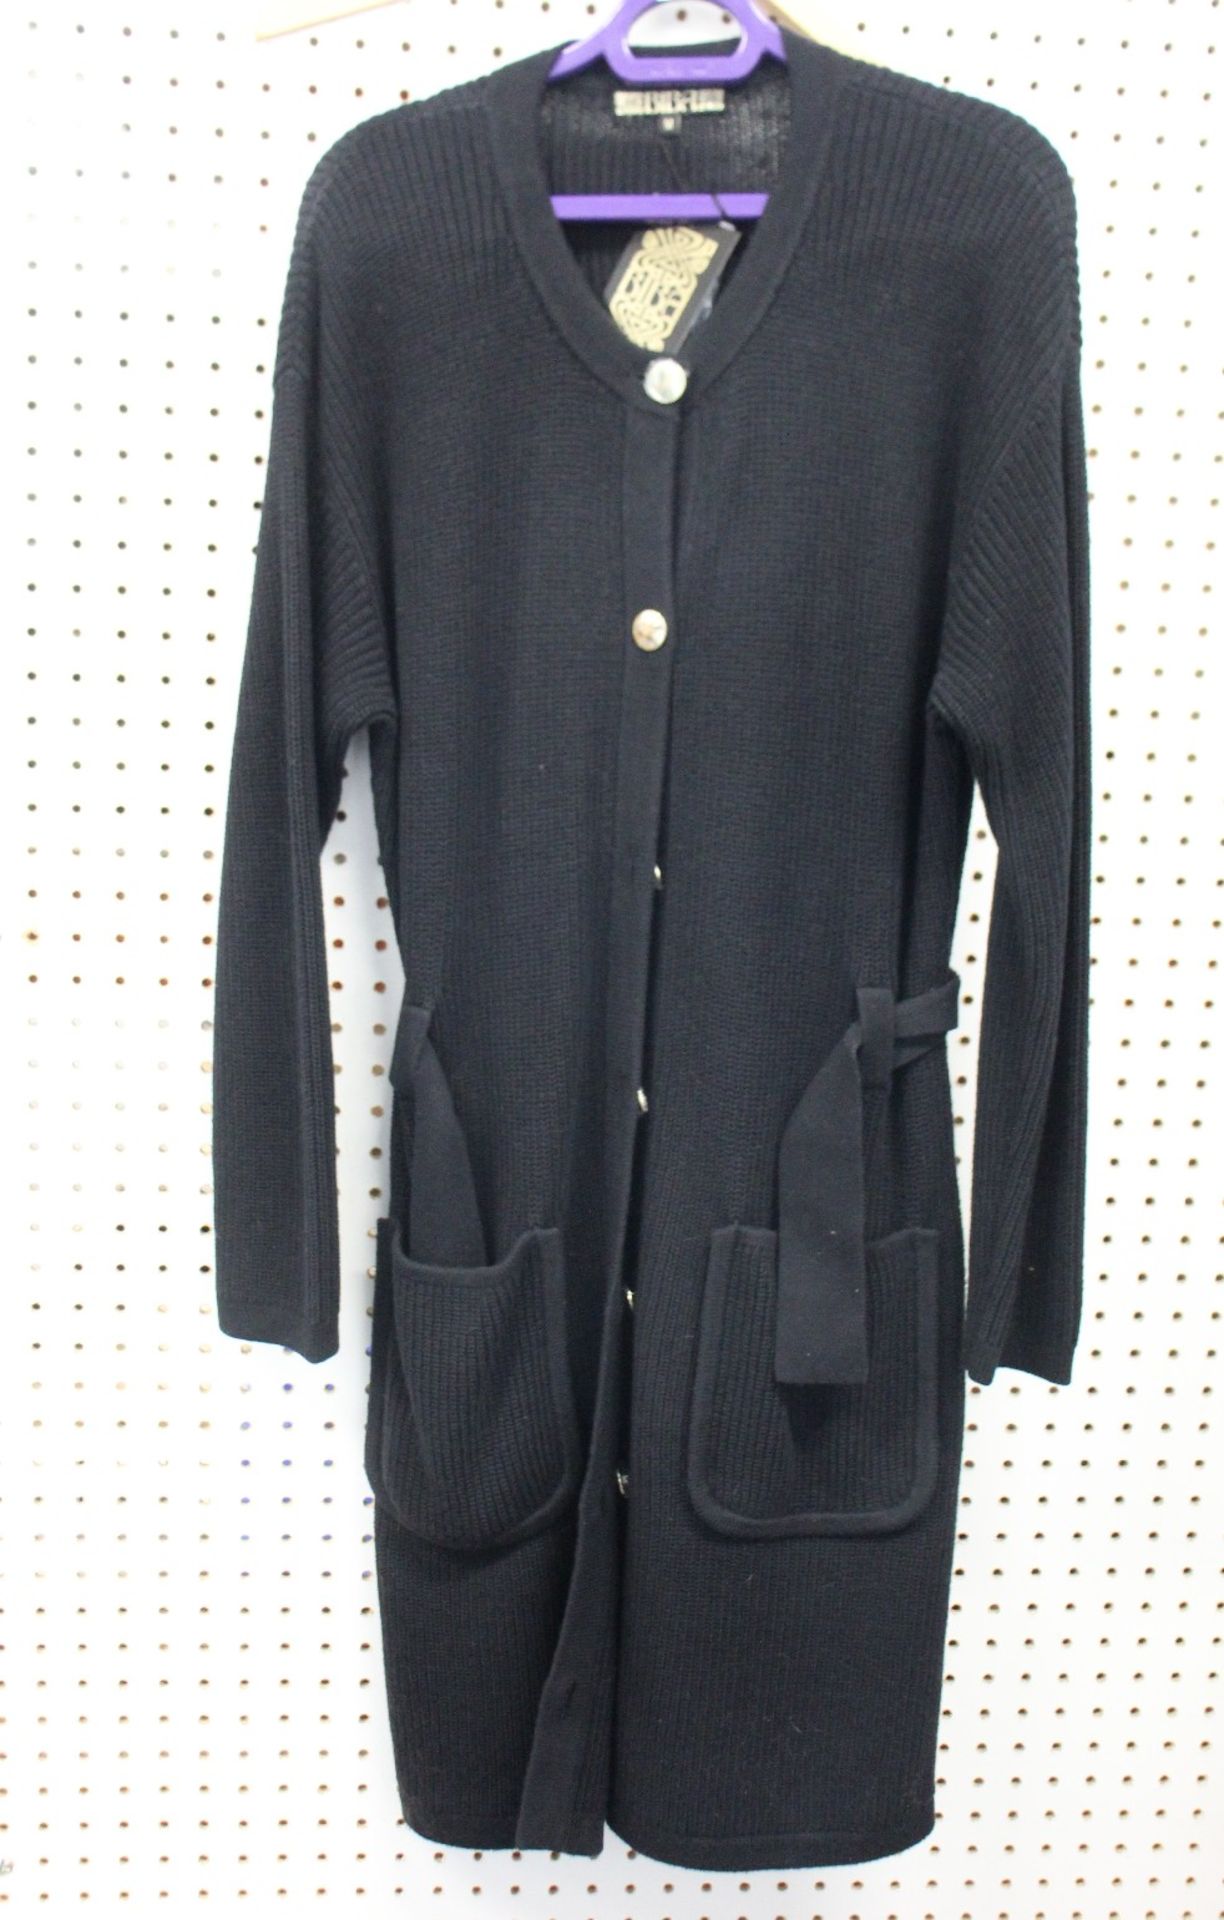 An as new Biba belted black cardigan with tags (12/M).